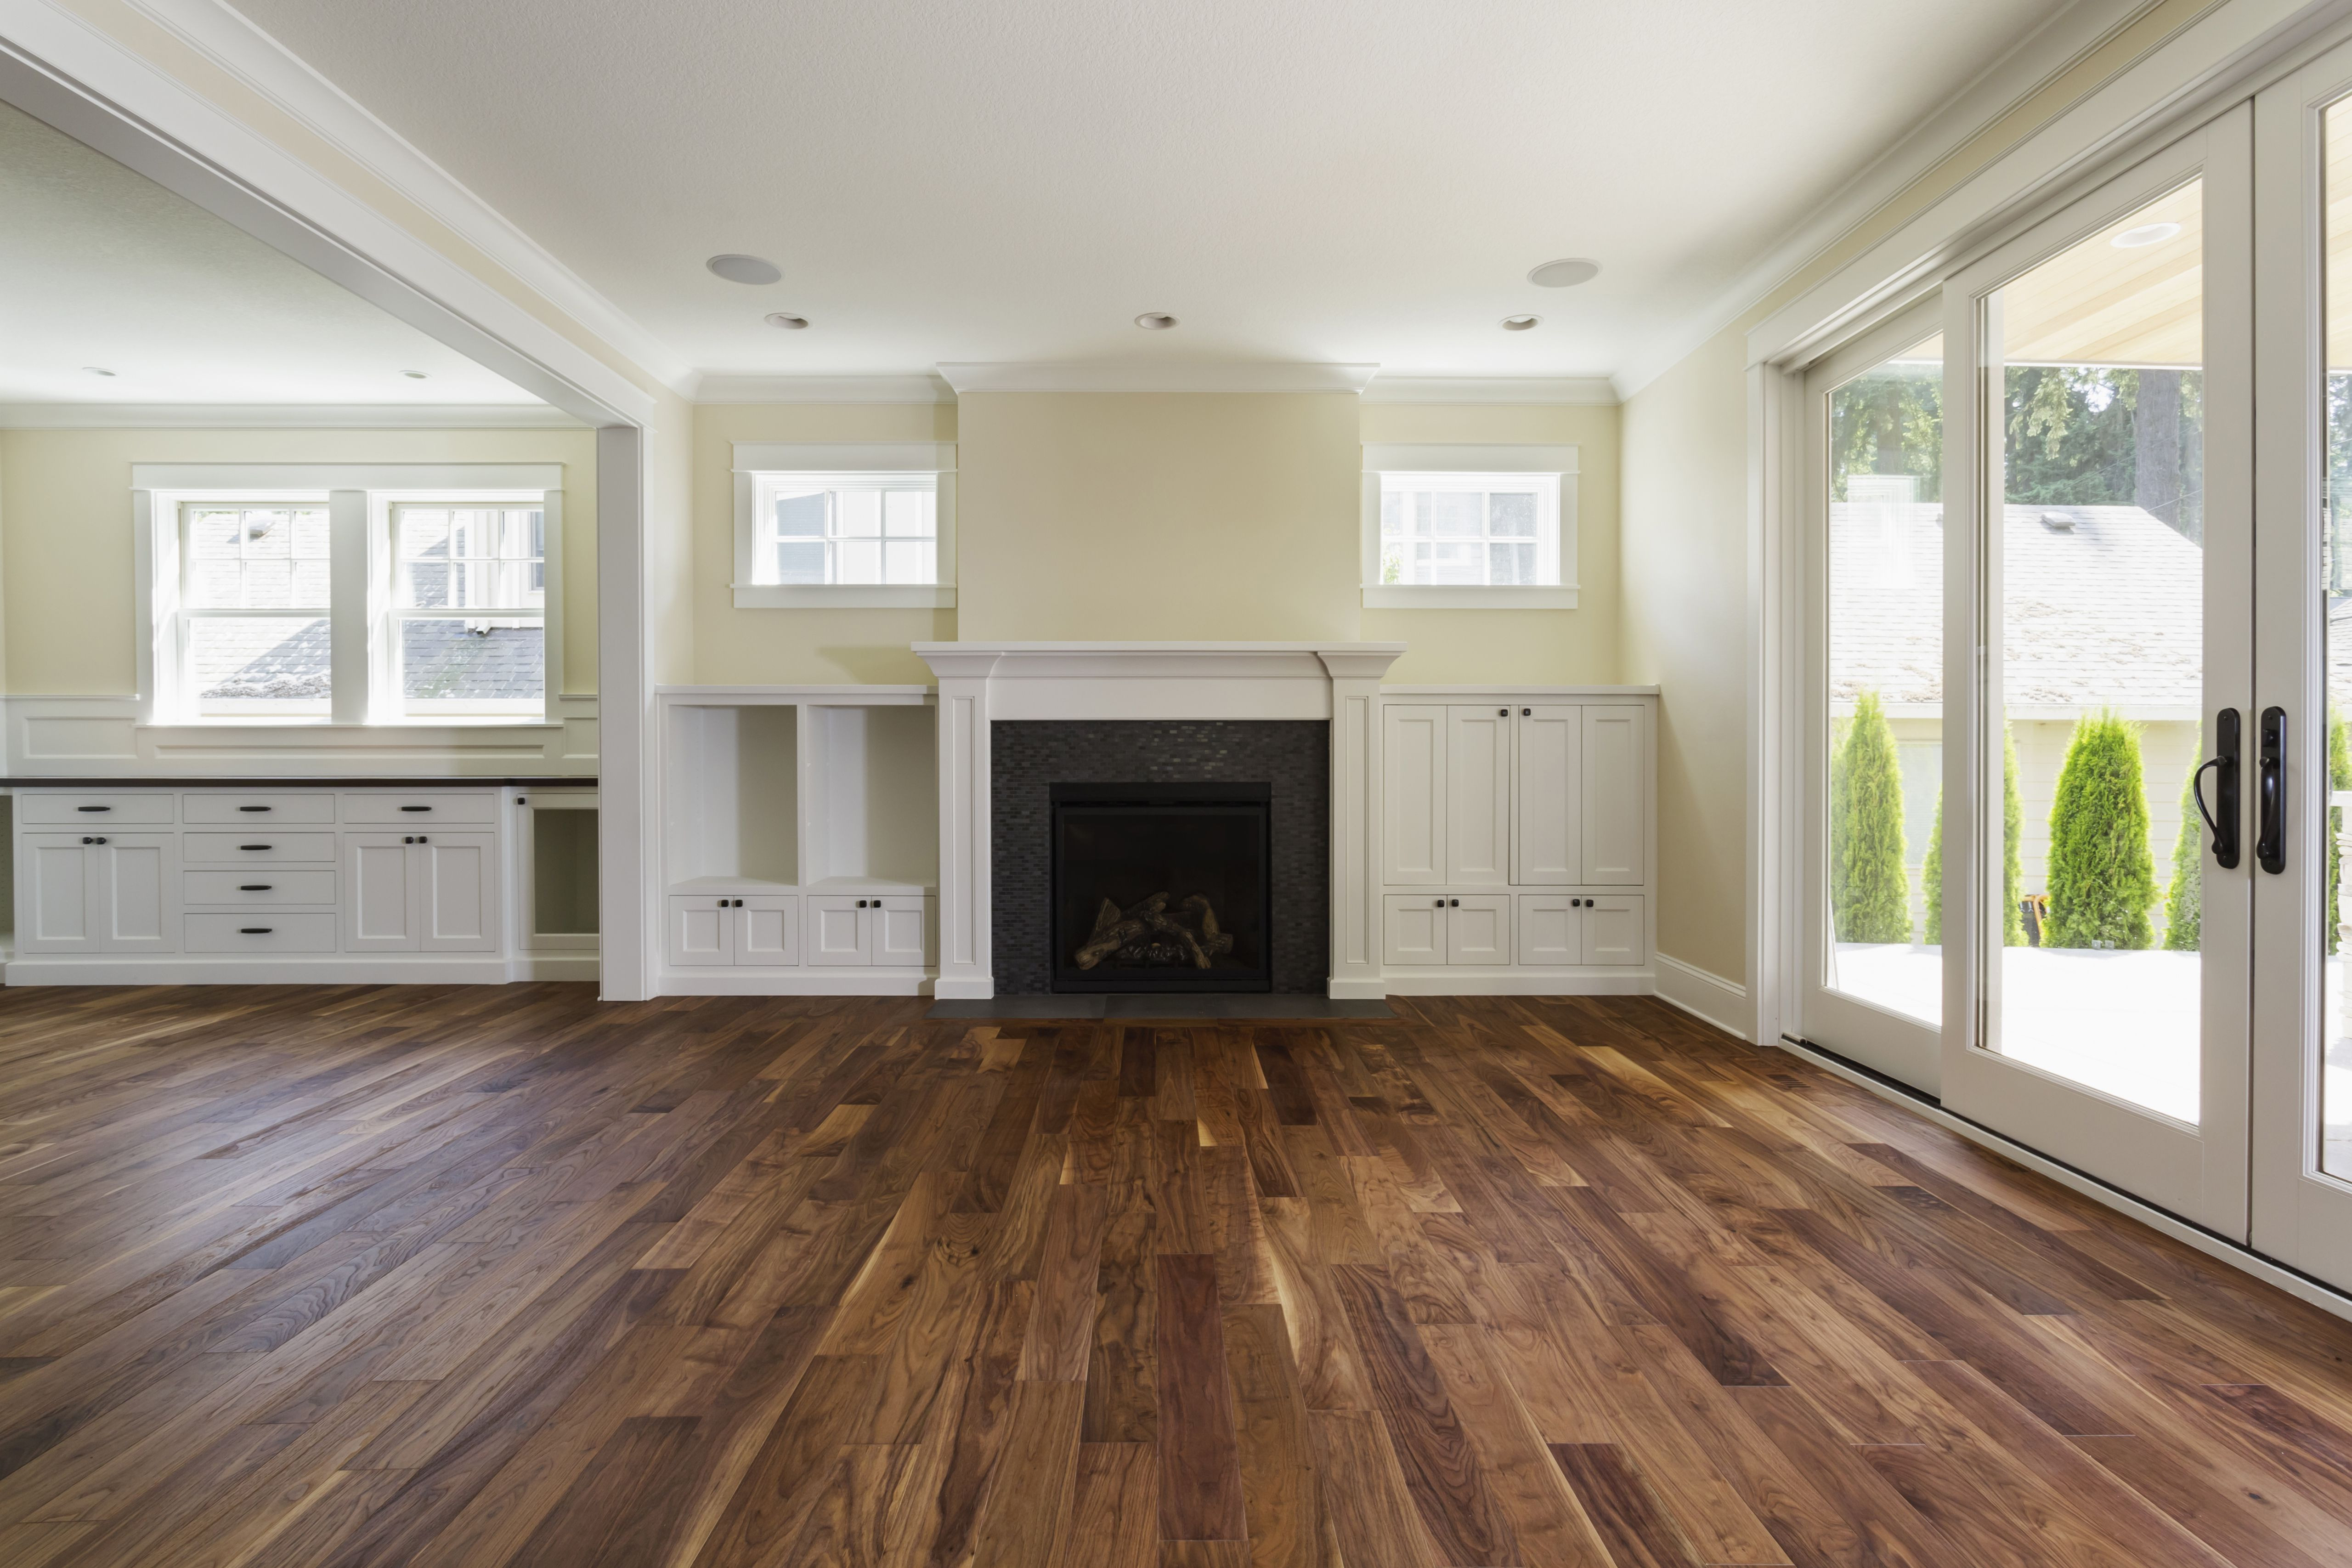 unfinished white oak hardwood flooring prices of the pros and cons of prefinished hardwood flooring pertaining to fireplace and built in shelves in living room 482143011 57bef8e33df78cc16e035397